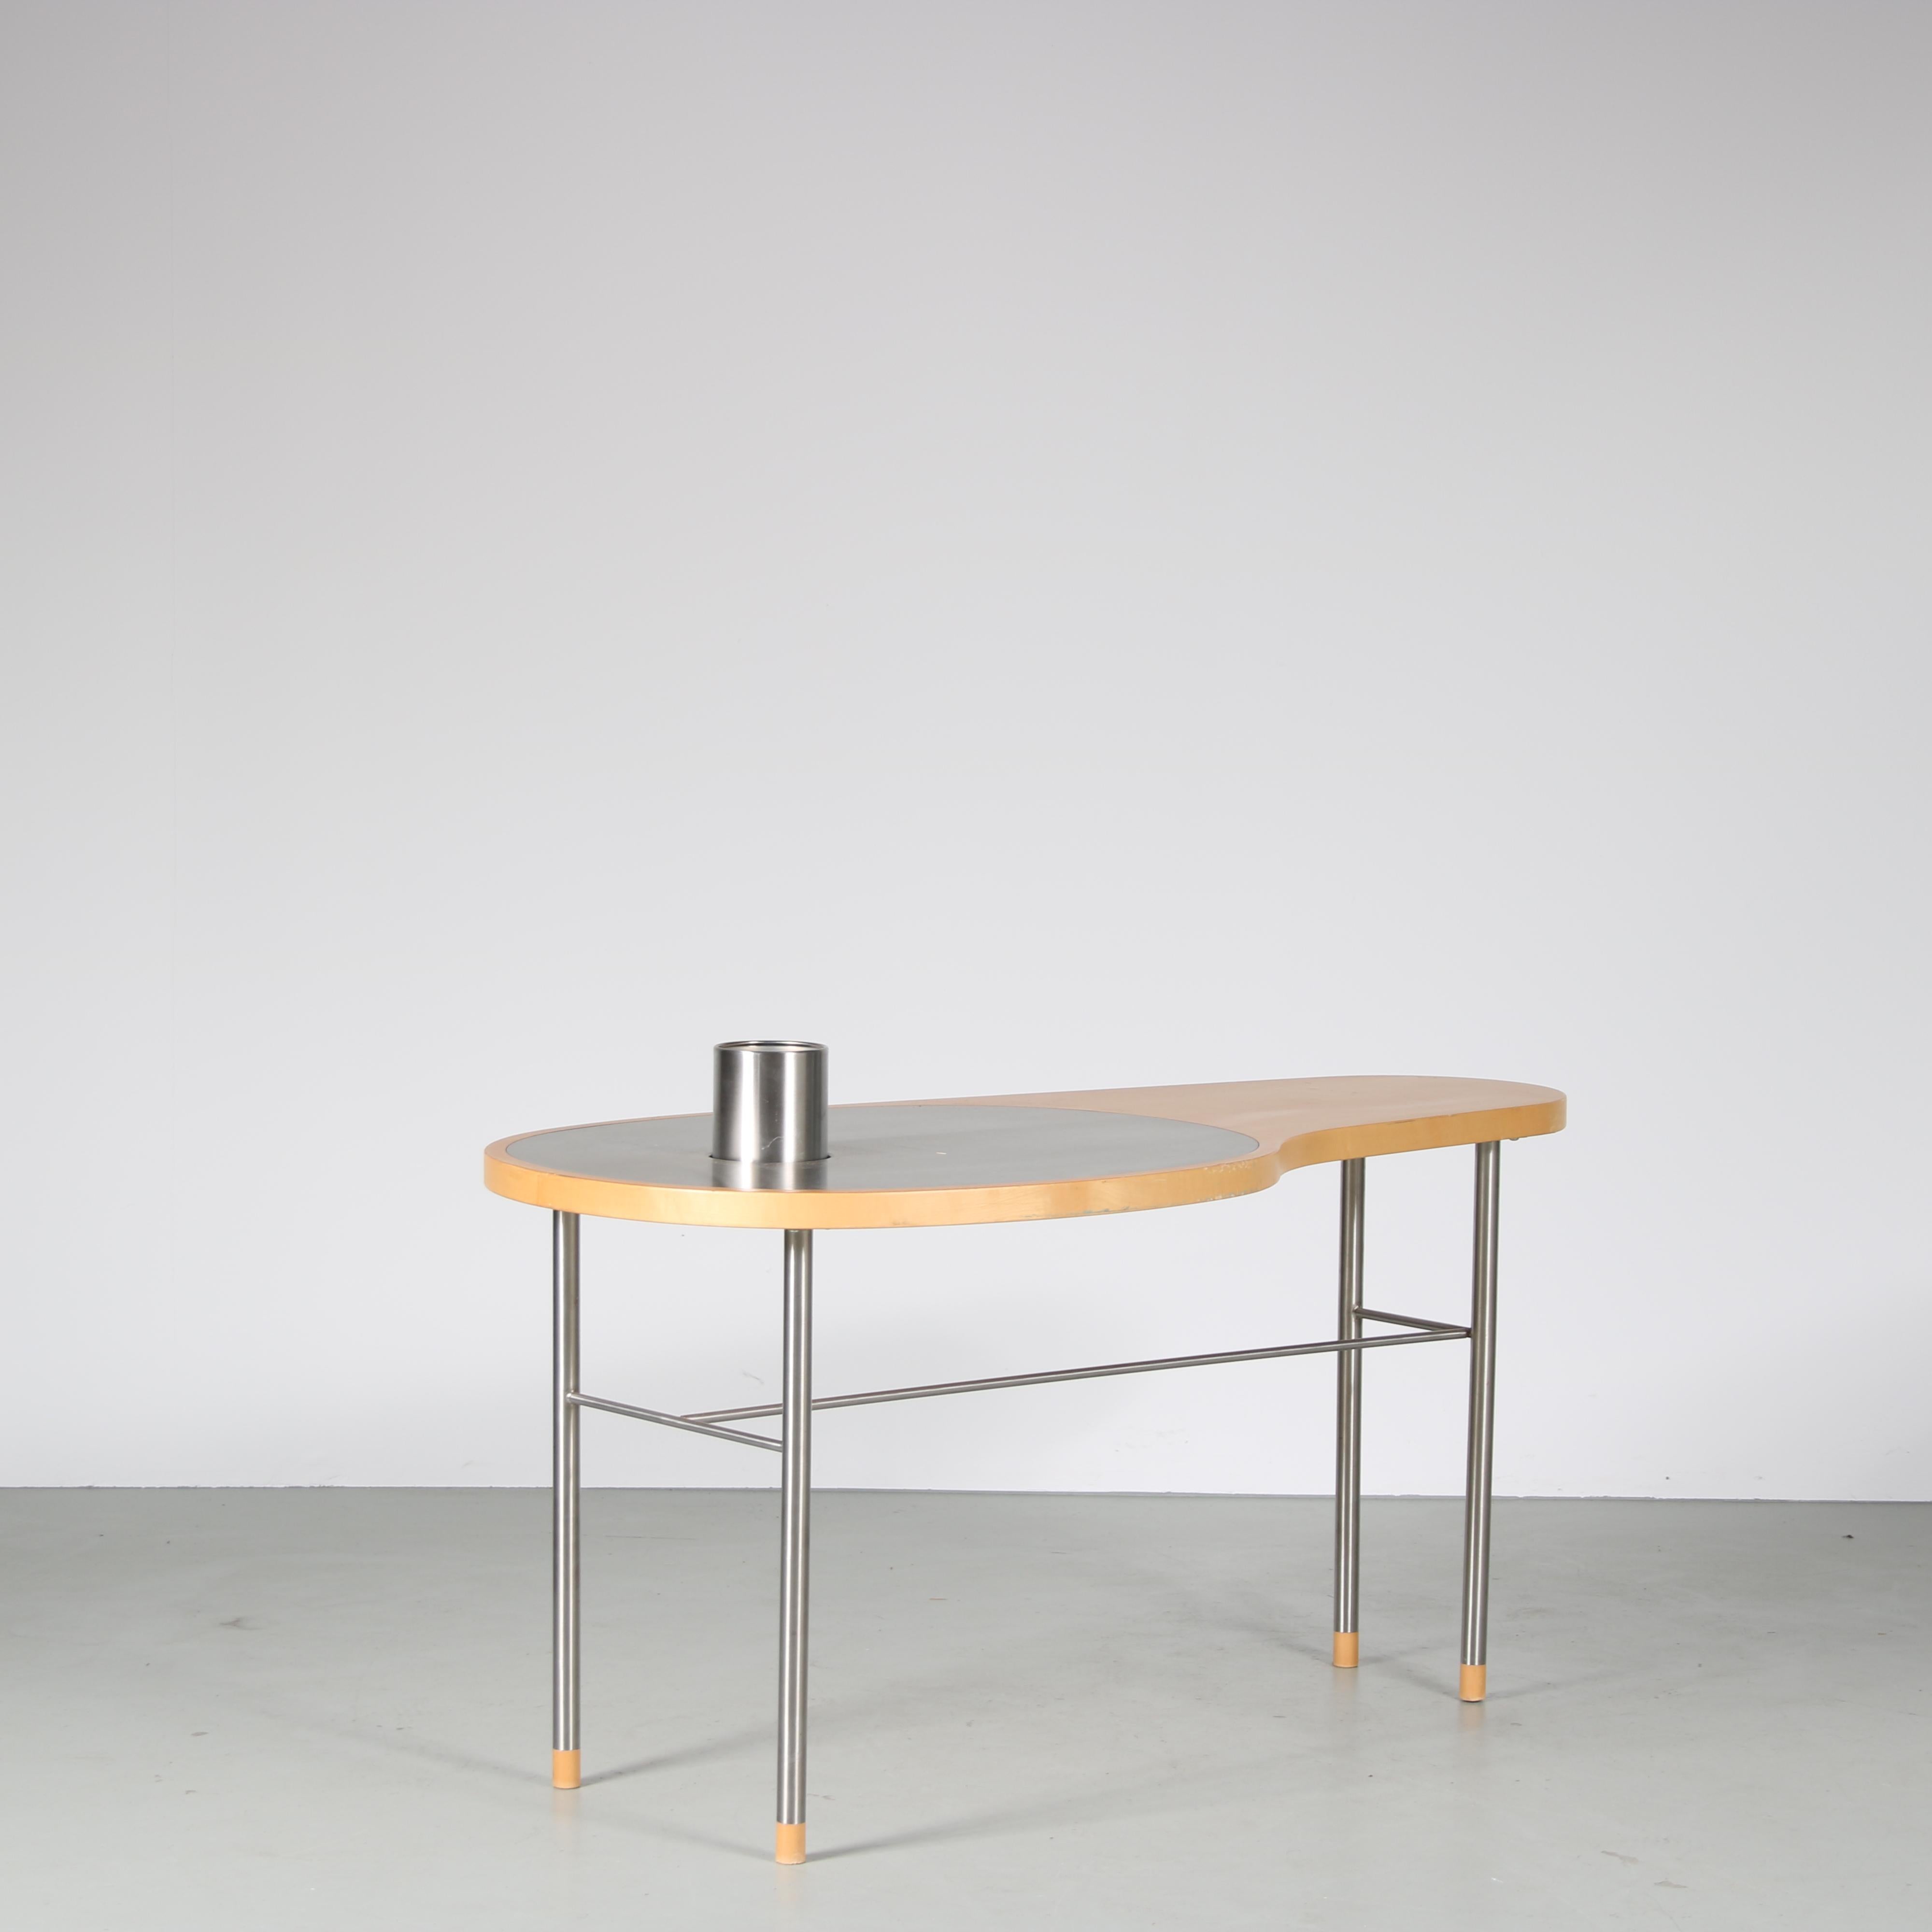 An iconic “Ross” coffee table, designed by Finn Juhl and manufactured by House of Finn Juhl in Denmark around 2000.

A most innovating piece of design at it’s time, nowadays still a very modern design that fitting for many kinds of decors! The